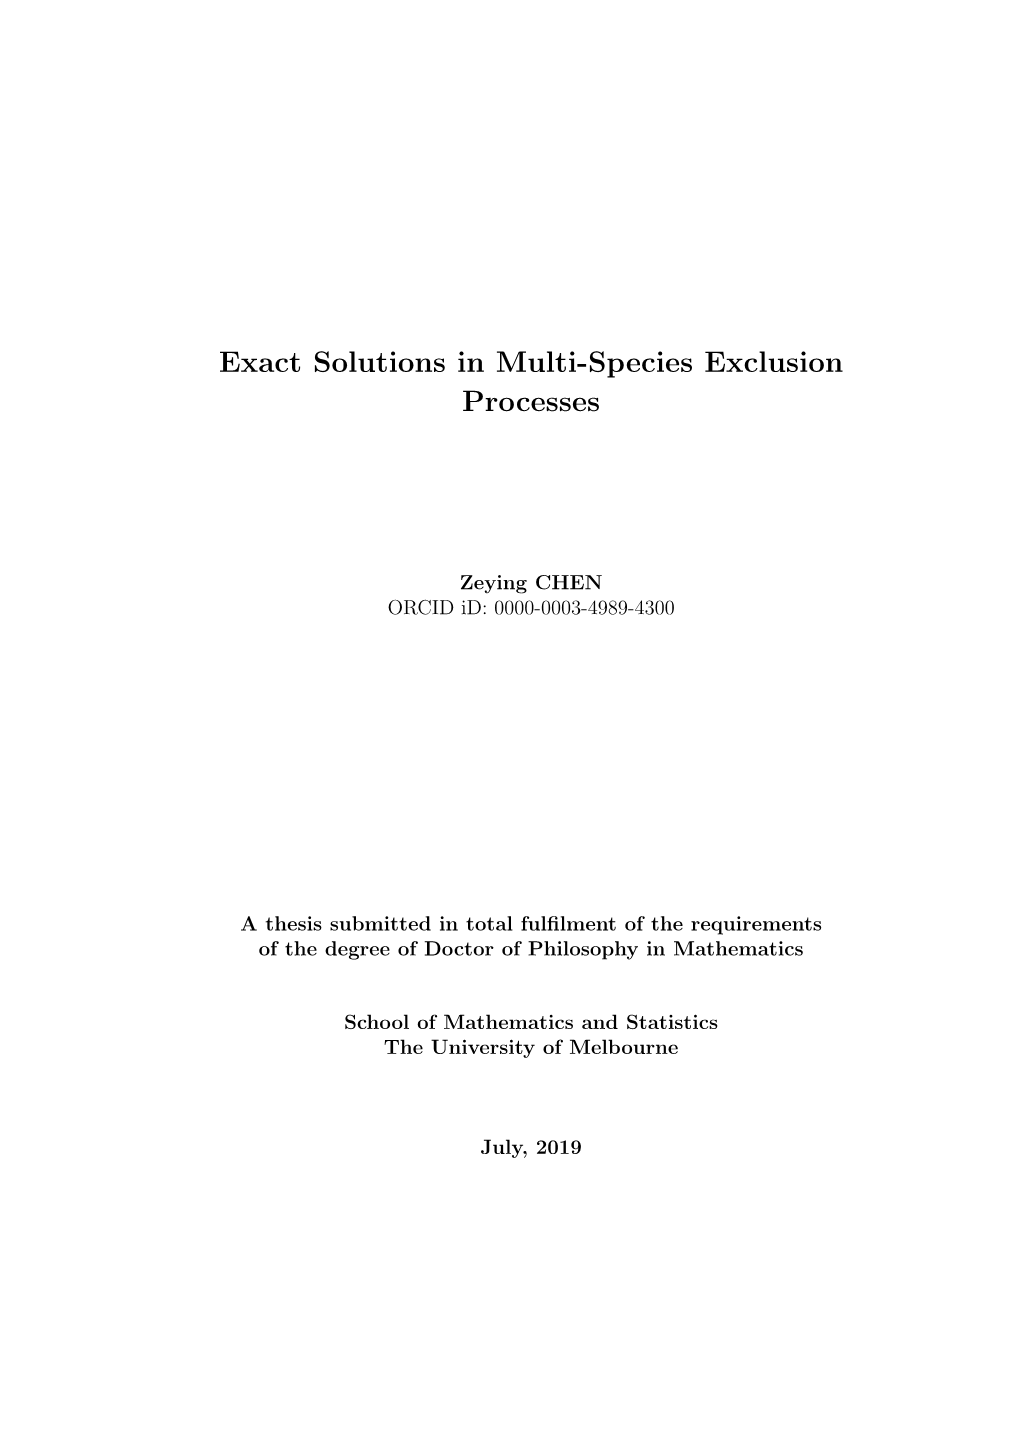 Exact Solutions in Multi-Species Exclusion Processes